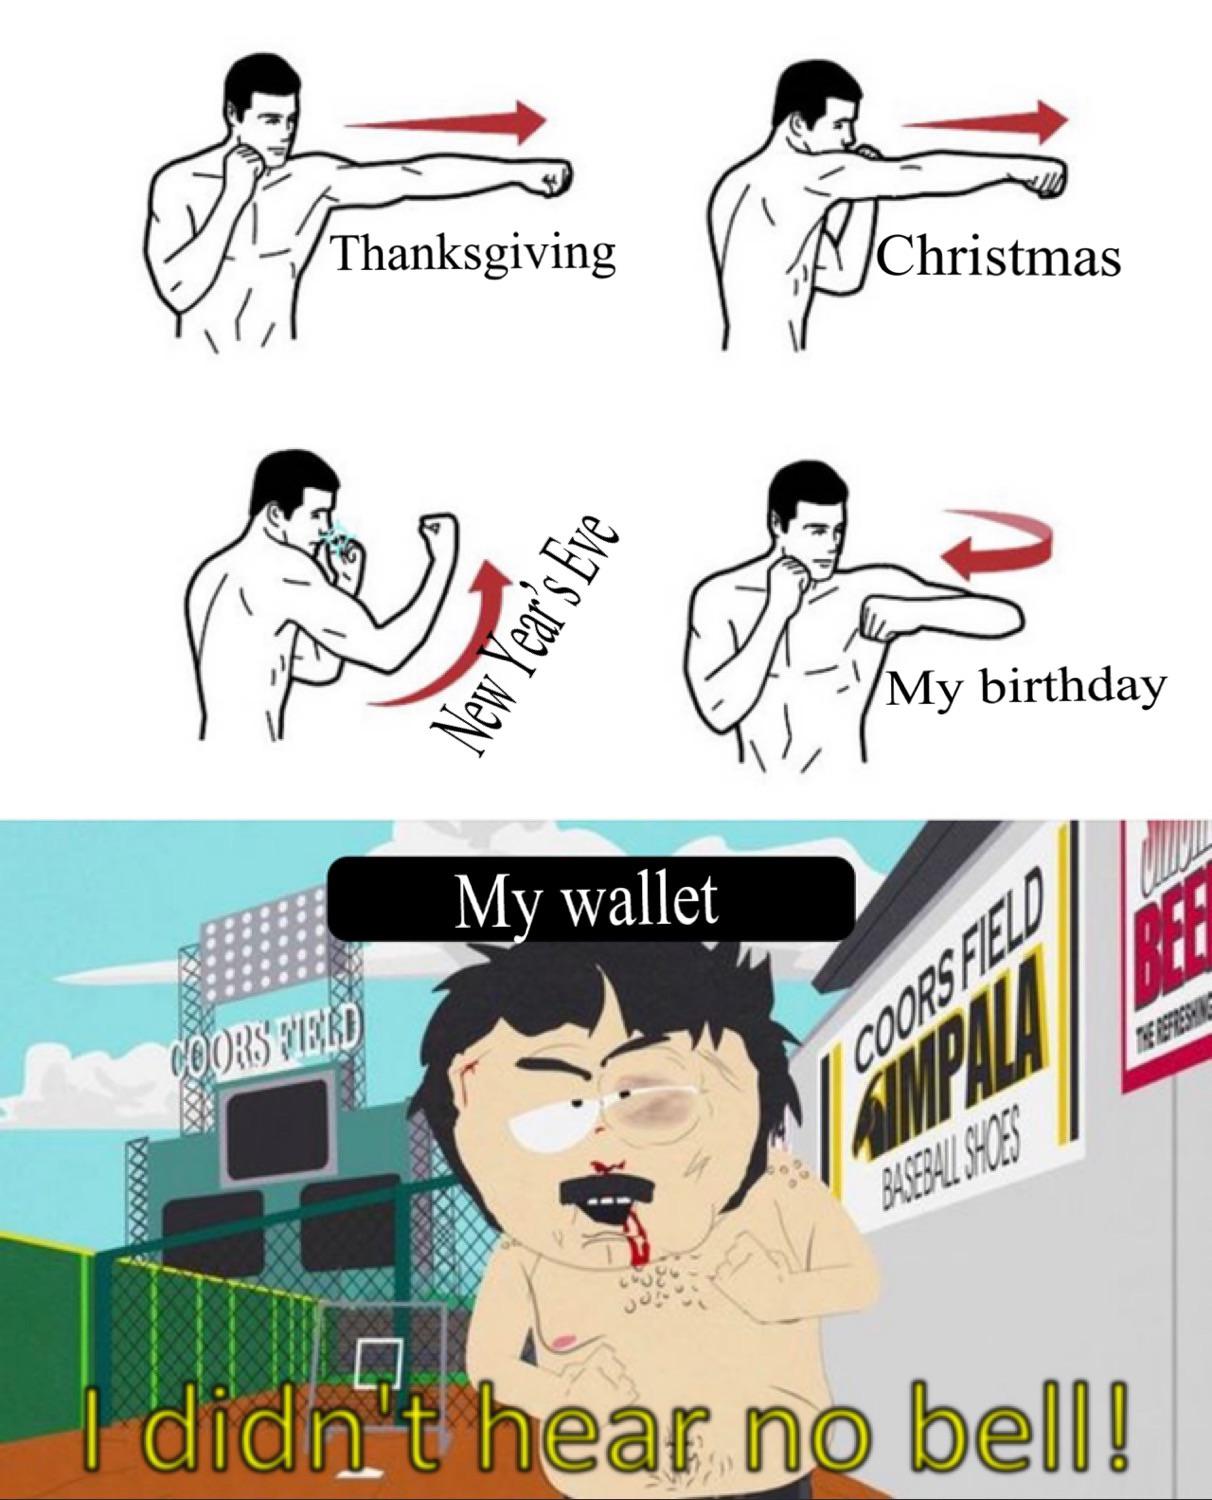 funny memes - combo punch meme - Se Thanksgiving At Christmas New Year's Eve My birthday My wallet Coors Hard Coorsfeed Baseba 58475 I didn't hear no bell!